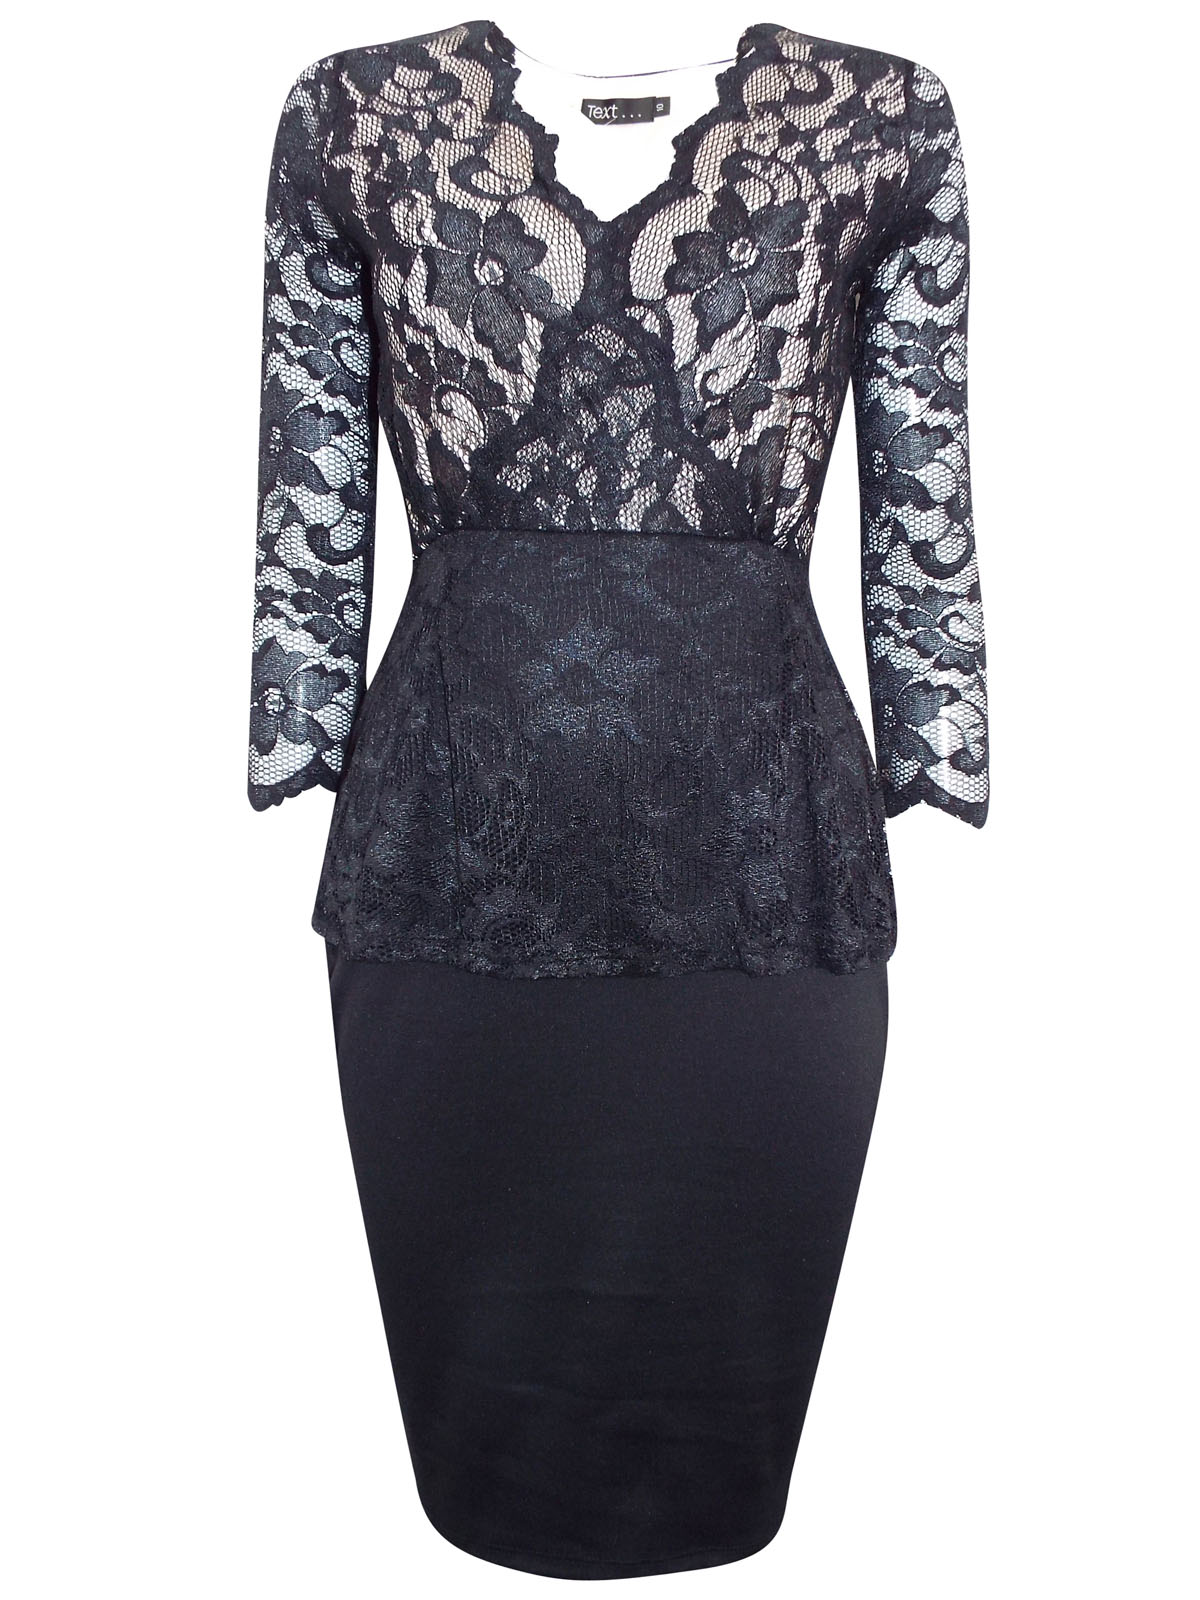 //text.. - - BLACK Floral Lace 3/4 Sleeve Shift Dress - Size 10 to 20